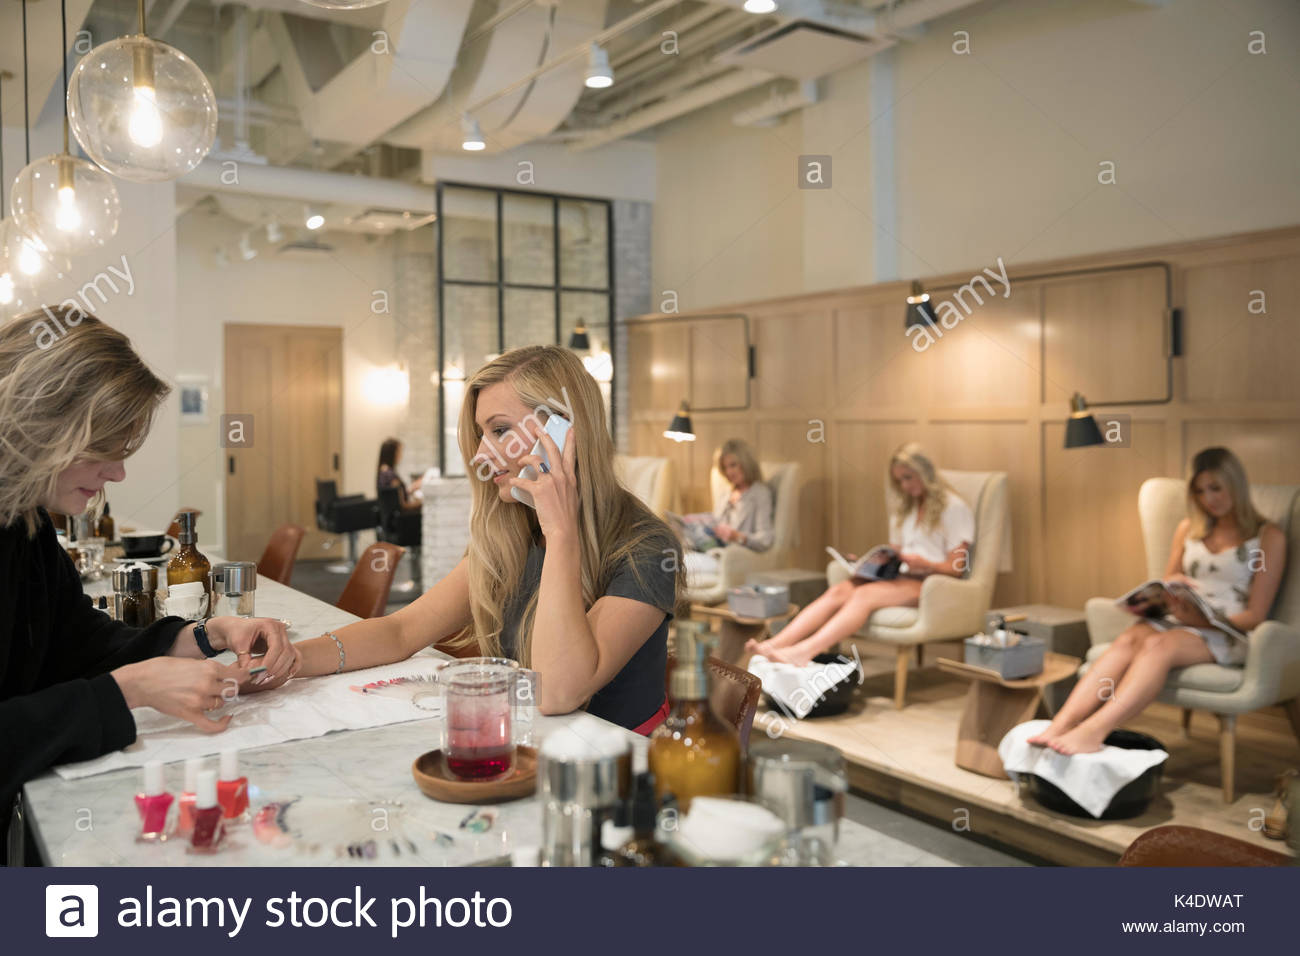 Female nail technician giving manicure to customer talking on cell phone in nail salon Stock Photo